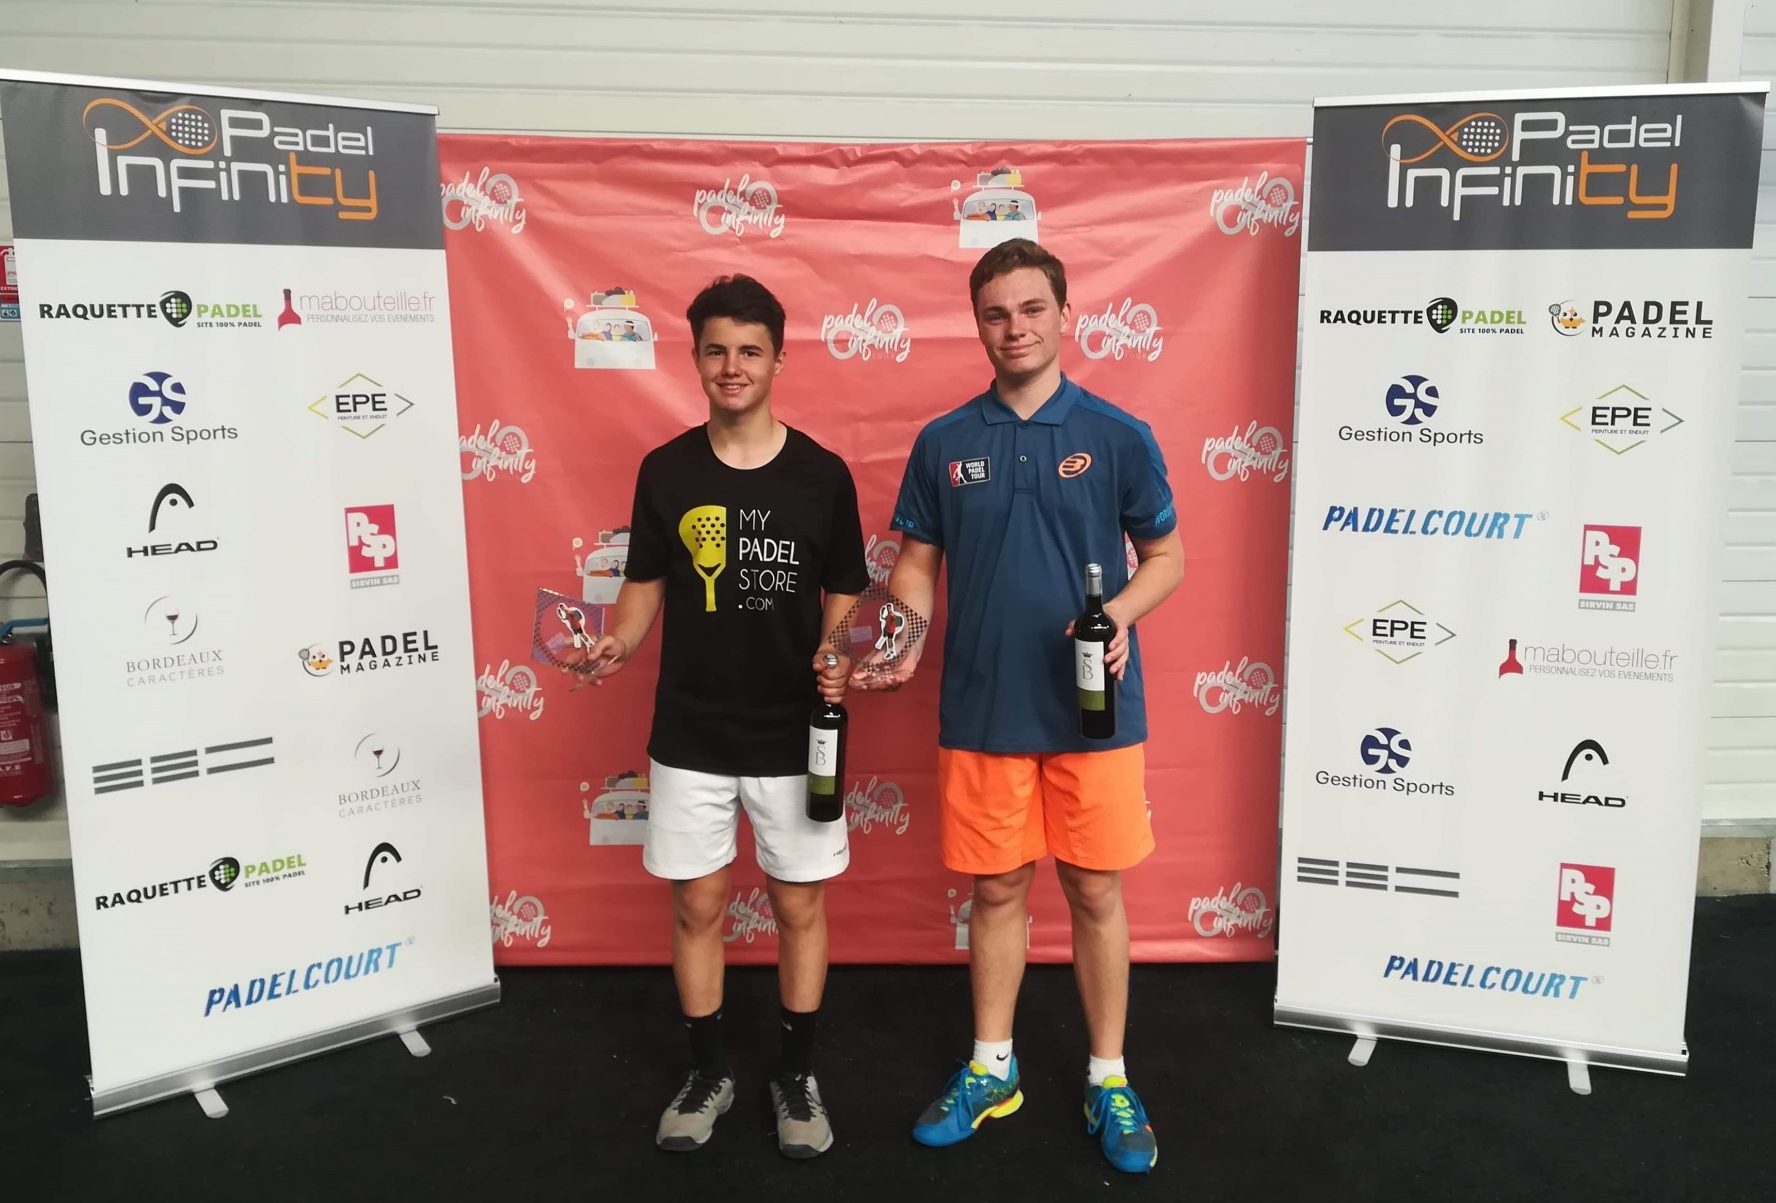 Dotte / Lorenzo: The youngest winners of padel in an approved Open